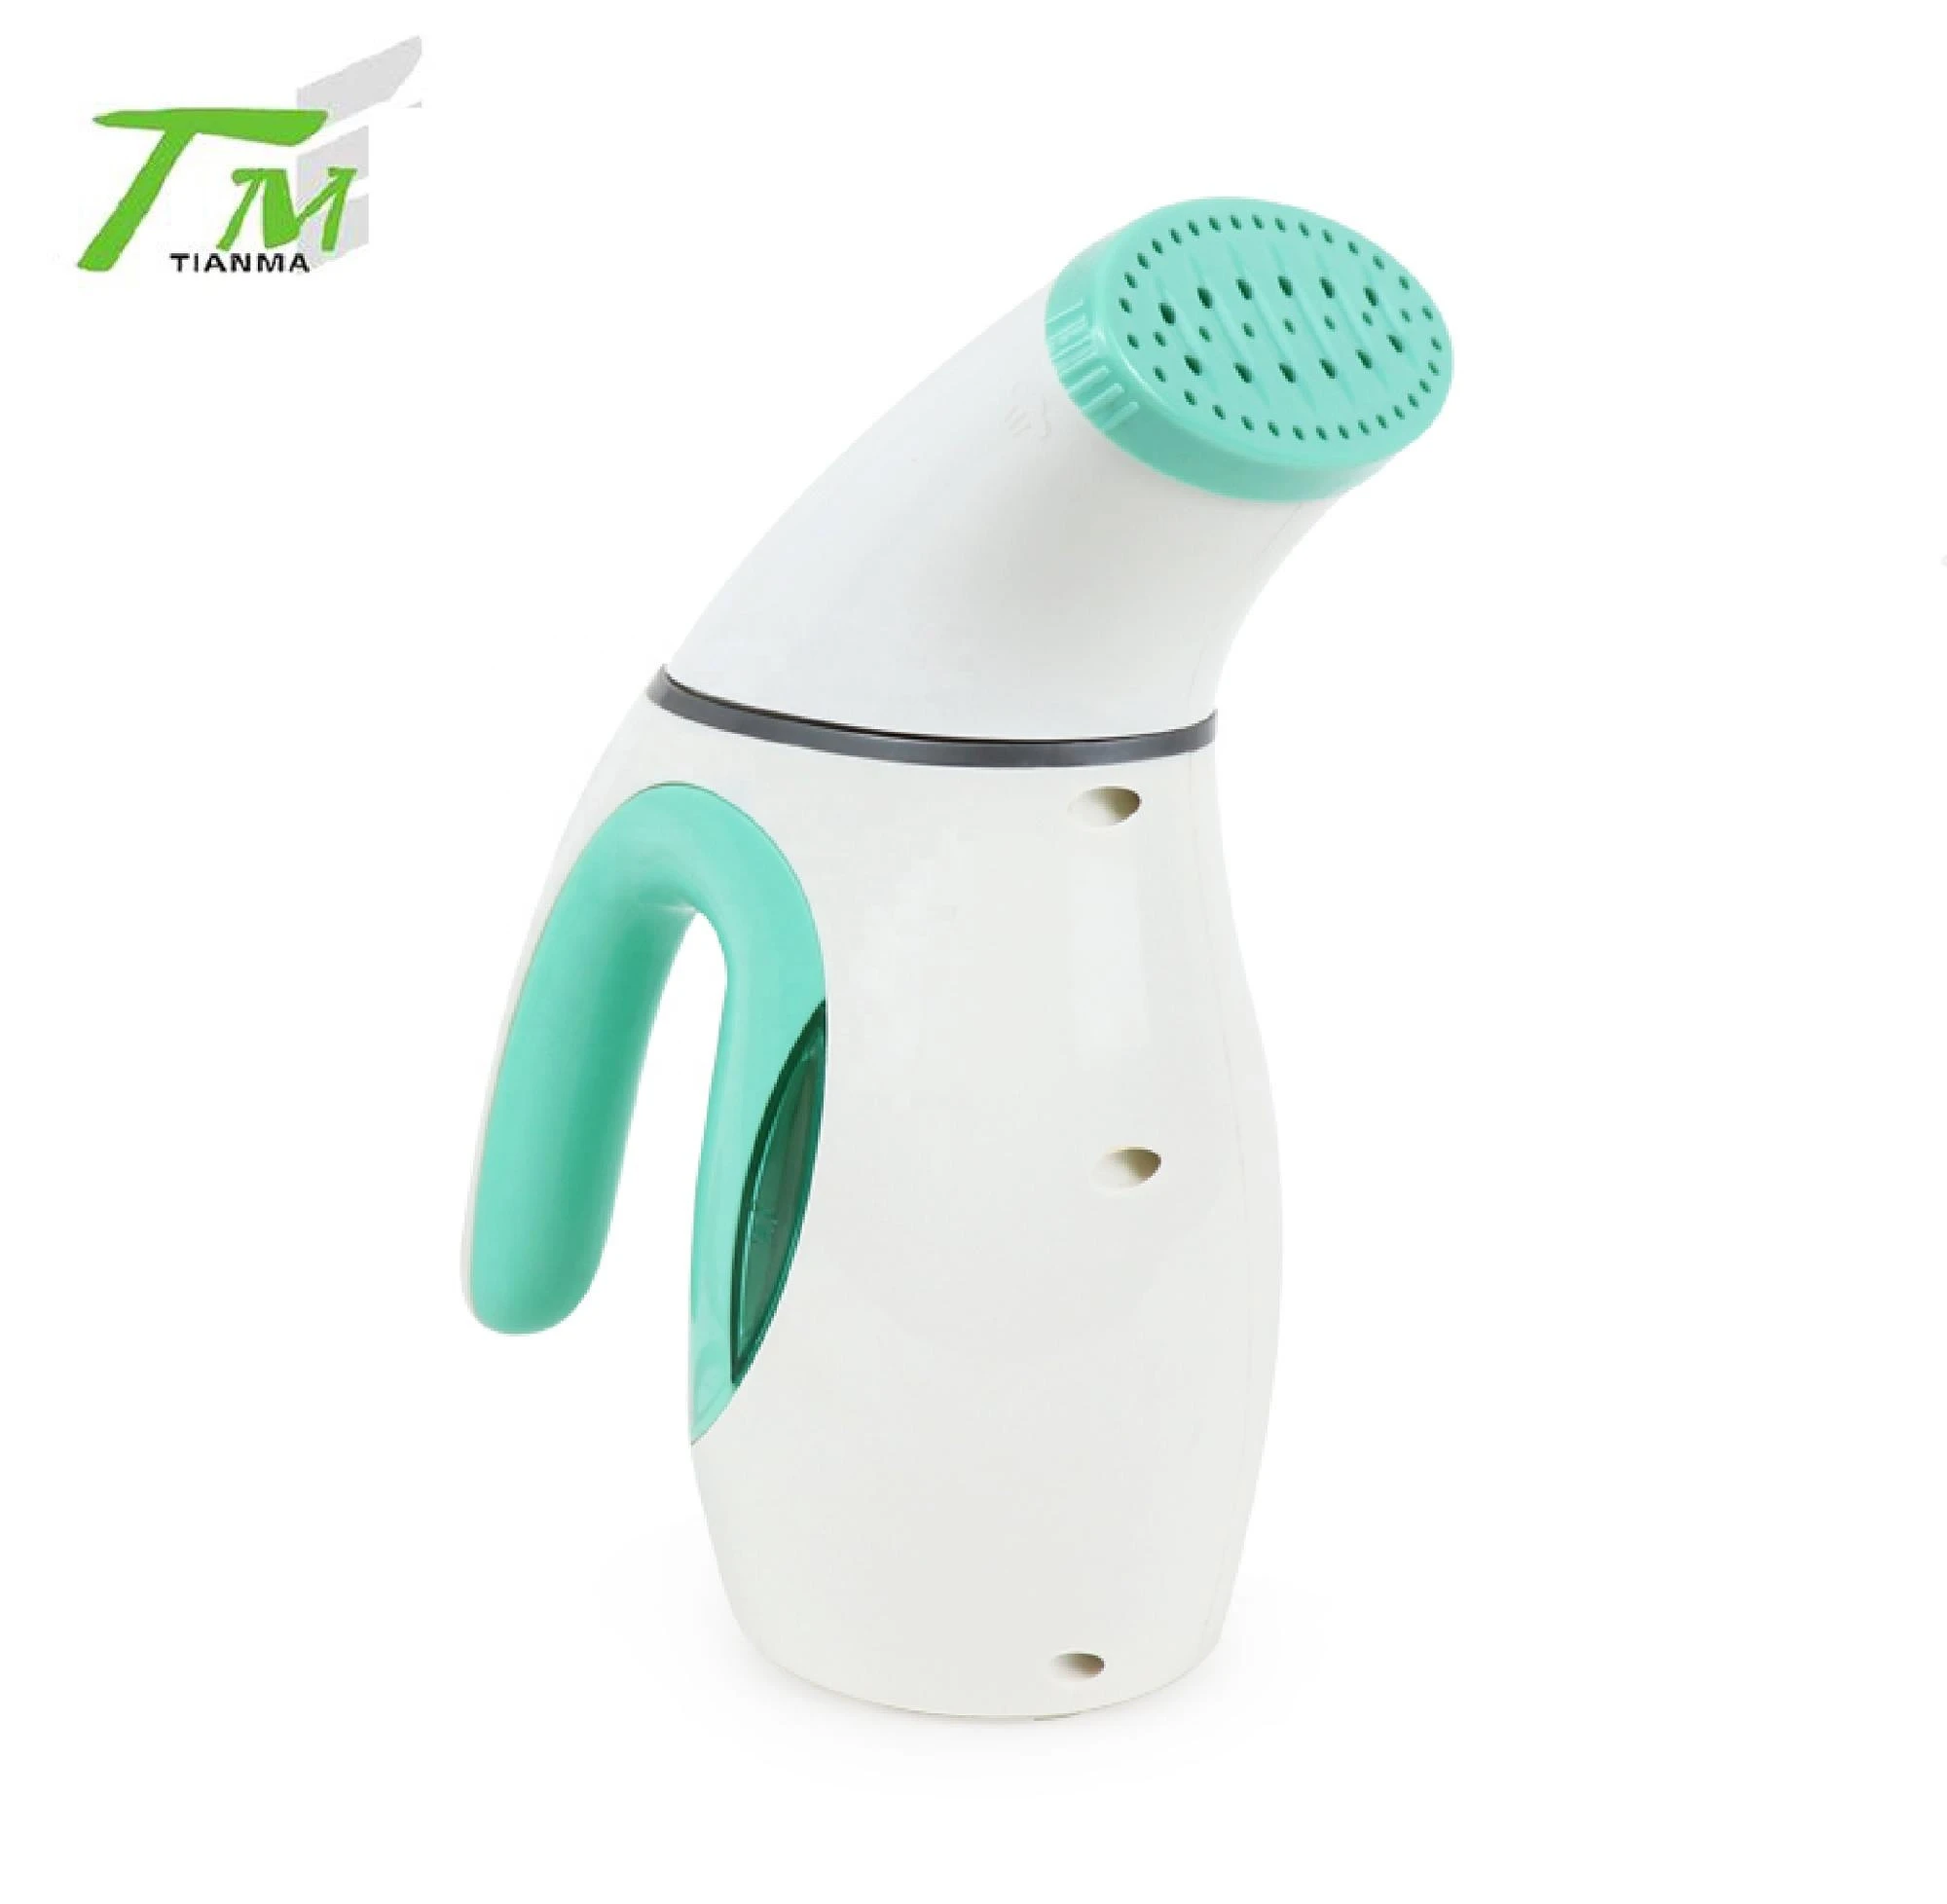 Handheld Garment Steamer hot sell home appliance portable folding travel electric iron mini handheld clothes steamer